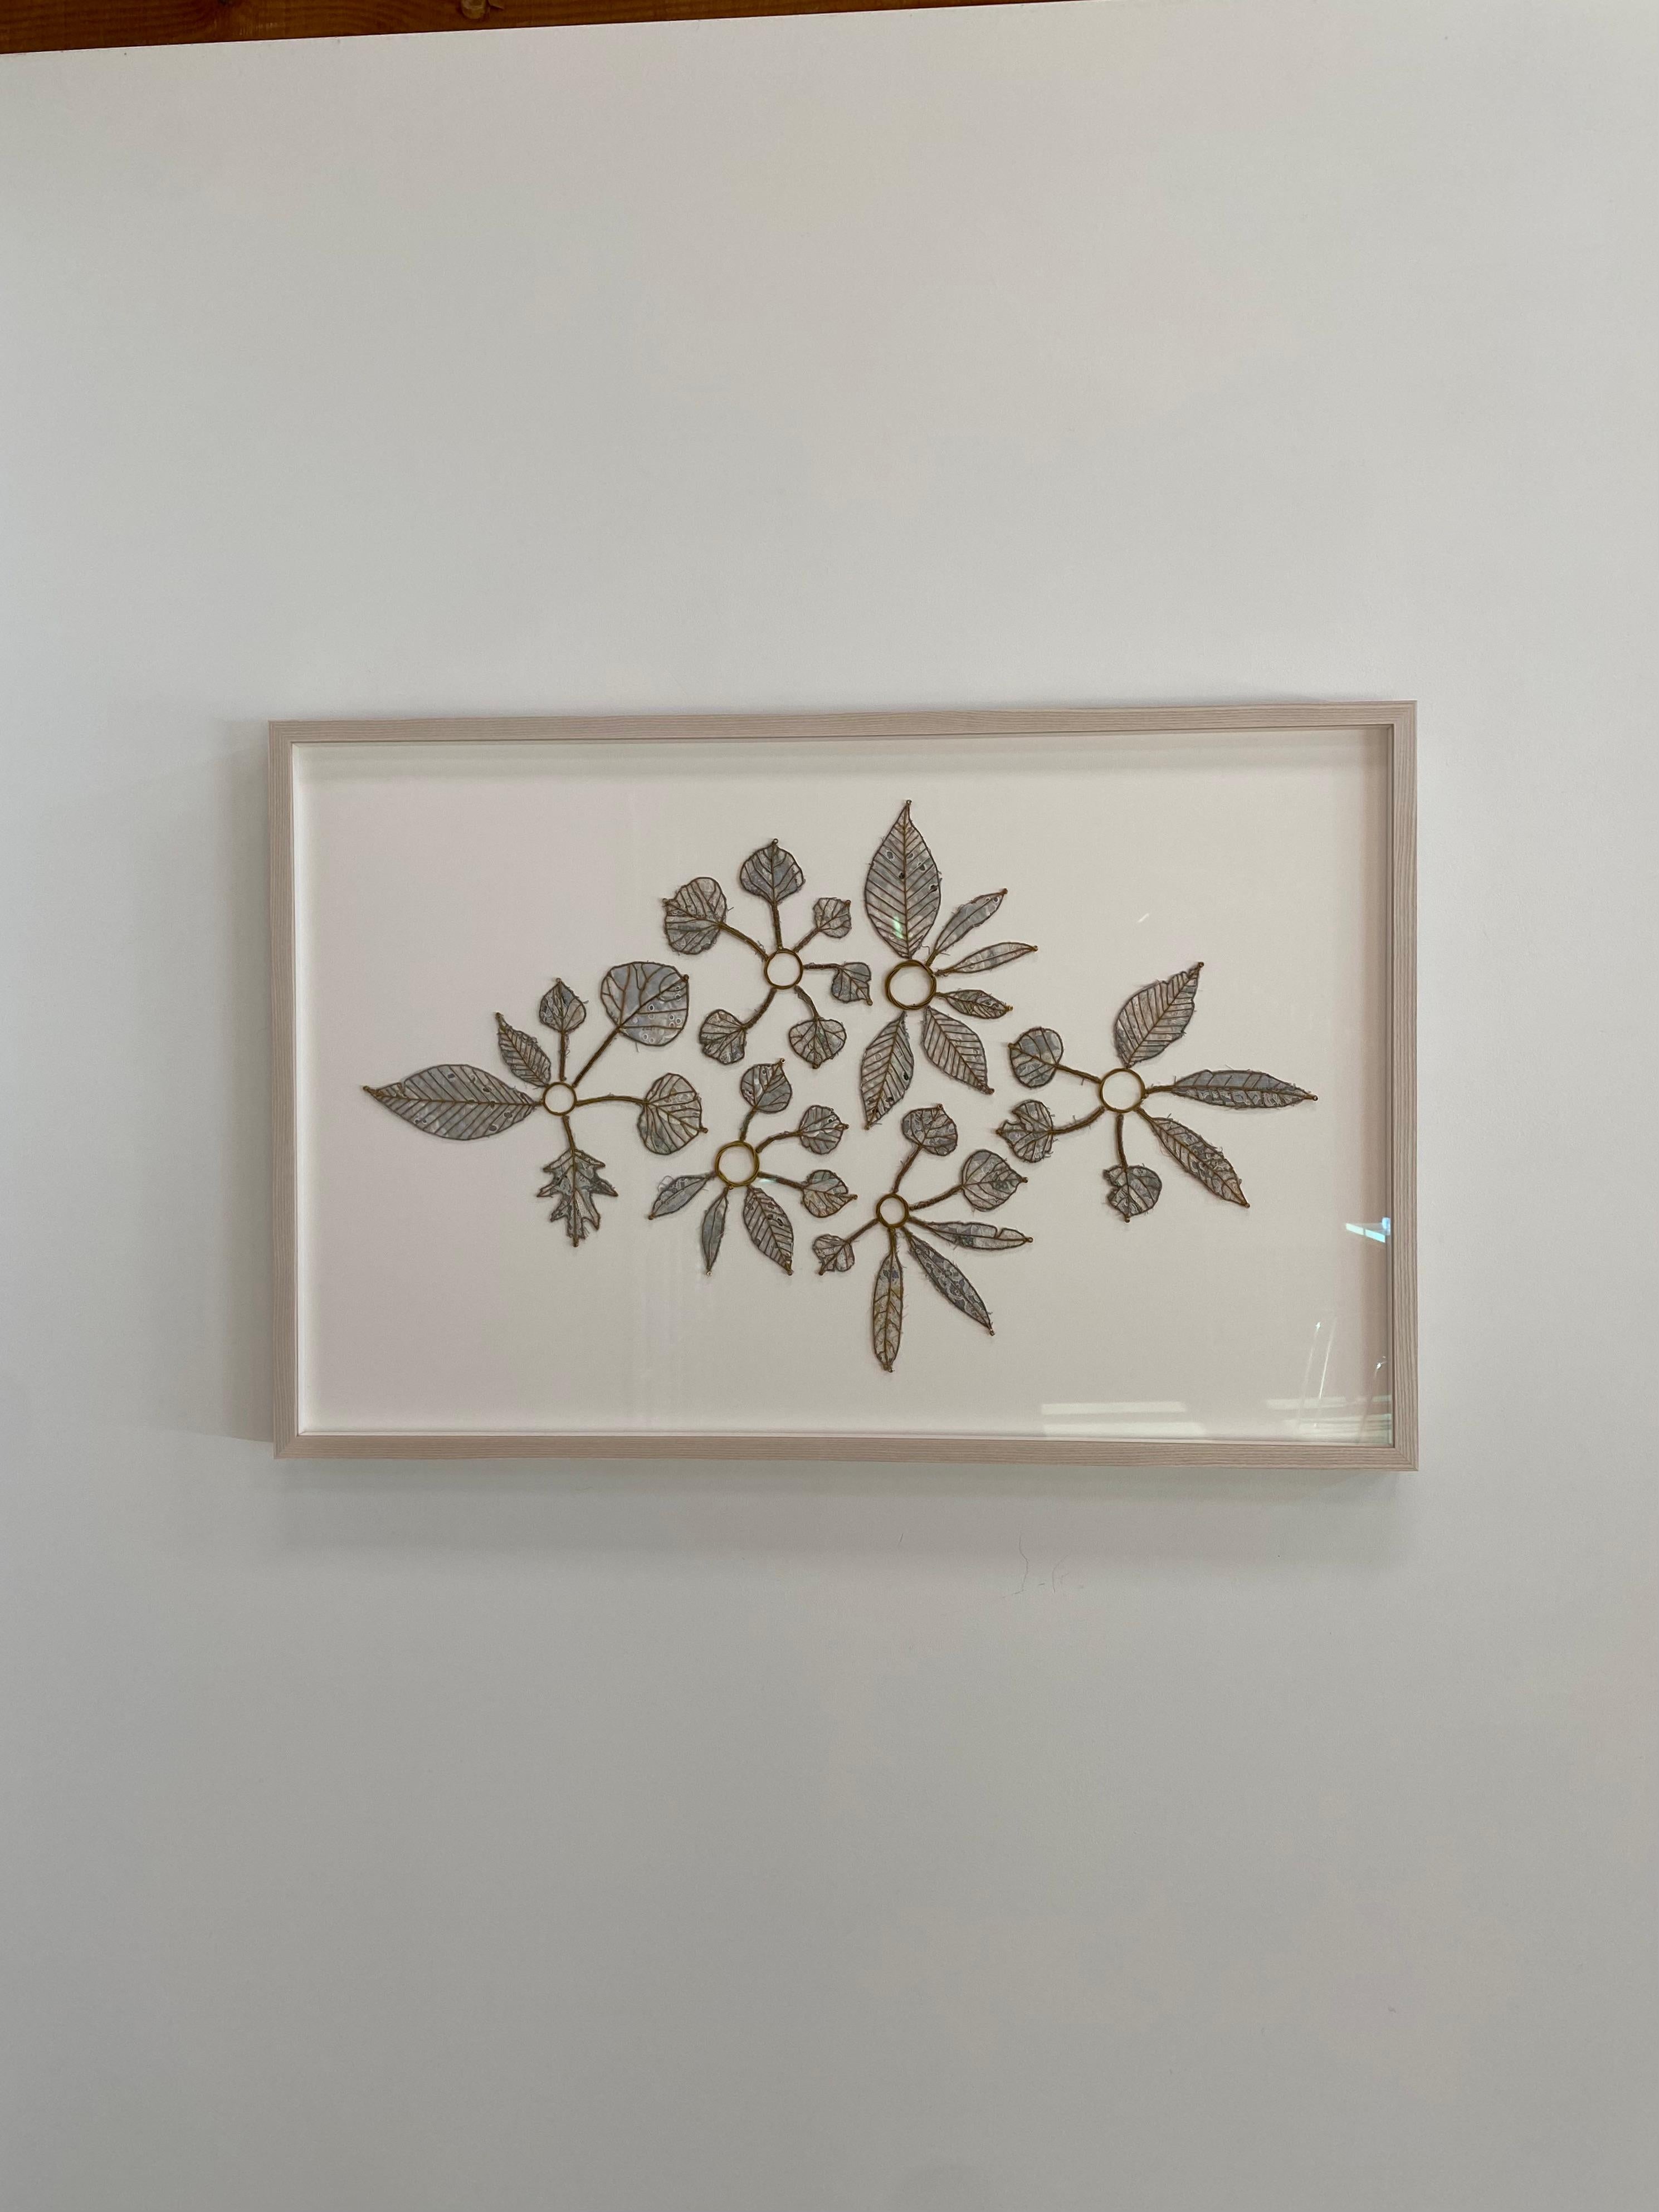 Hitkwike Green River, Leaves in Gray, Ivory, Gold Mixed Media Botanical Textile - Contemporary Mixed Media Art by Donna Sharrett